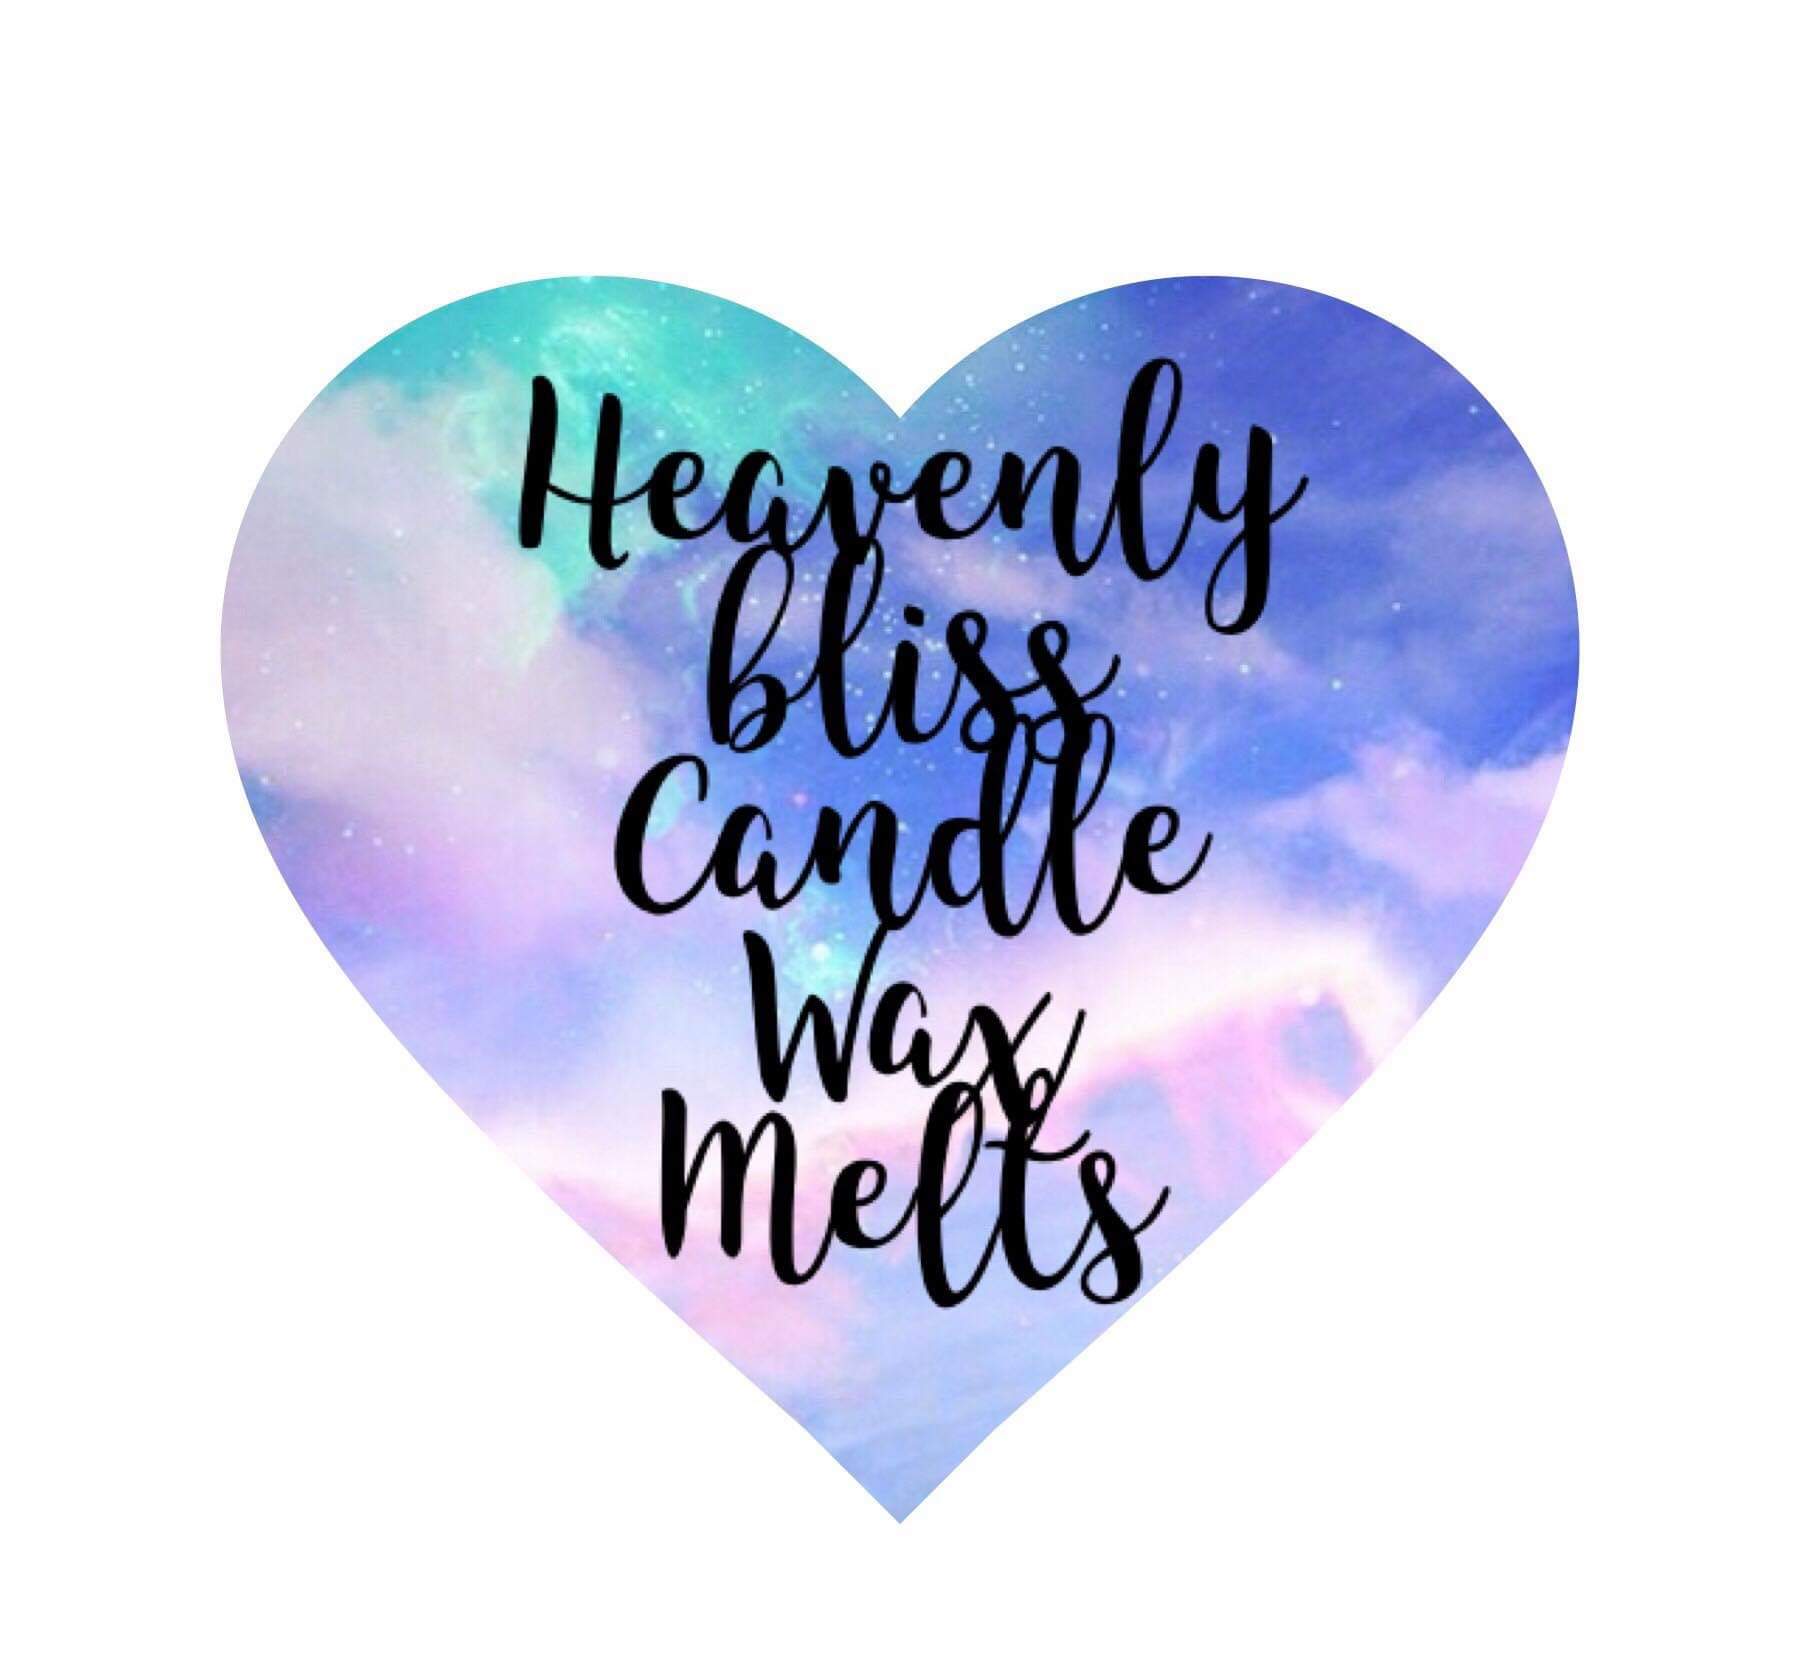 Heavenly Bliss Candle Wax Melts